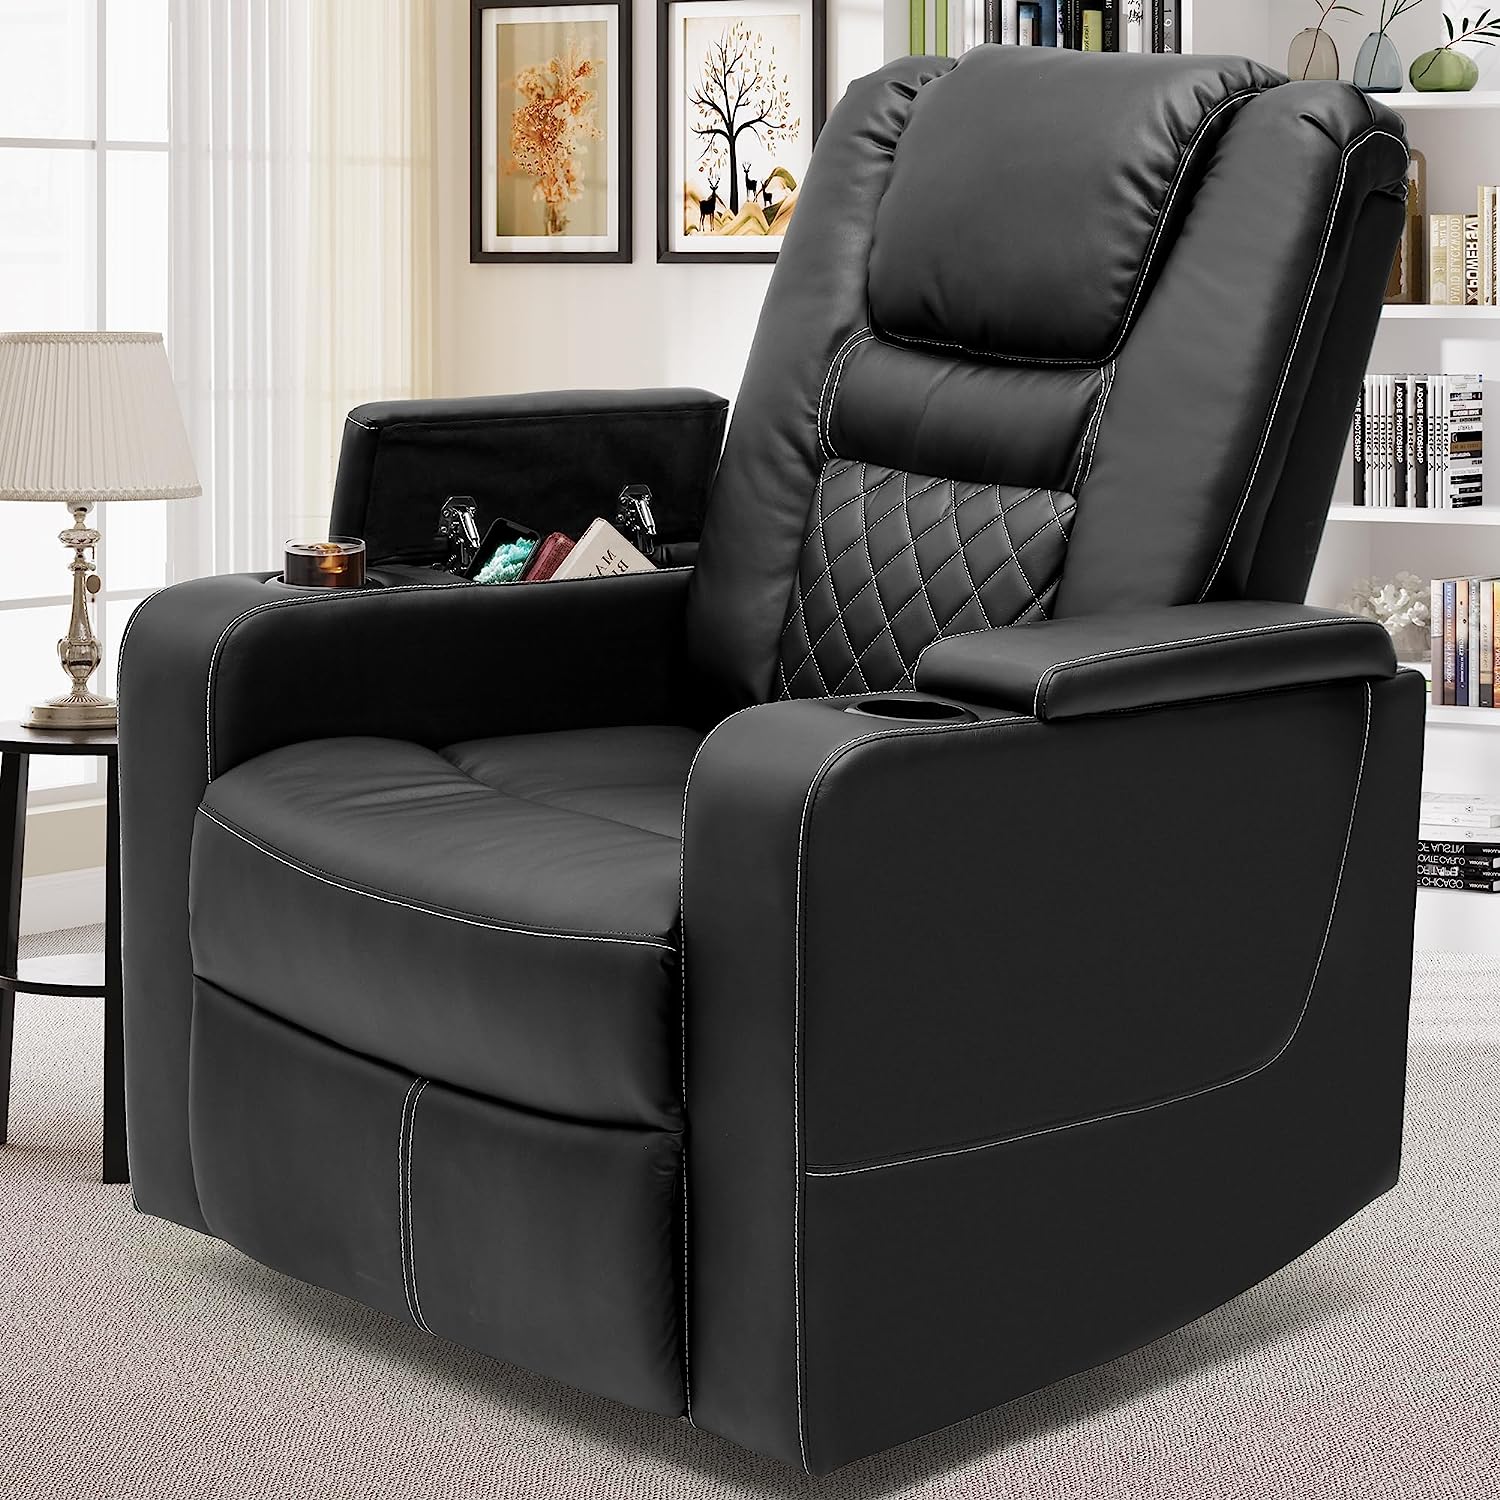 YITAHOME Swivel Glider Rocker Recliner Chair with Cup [...]